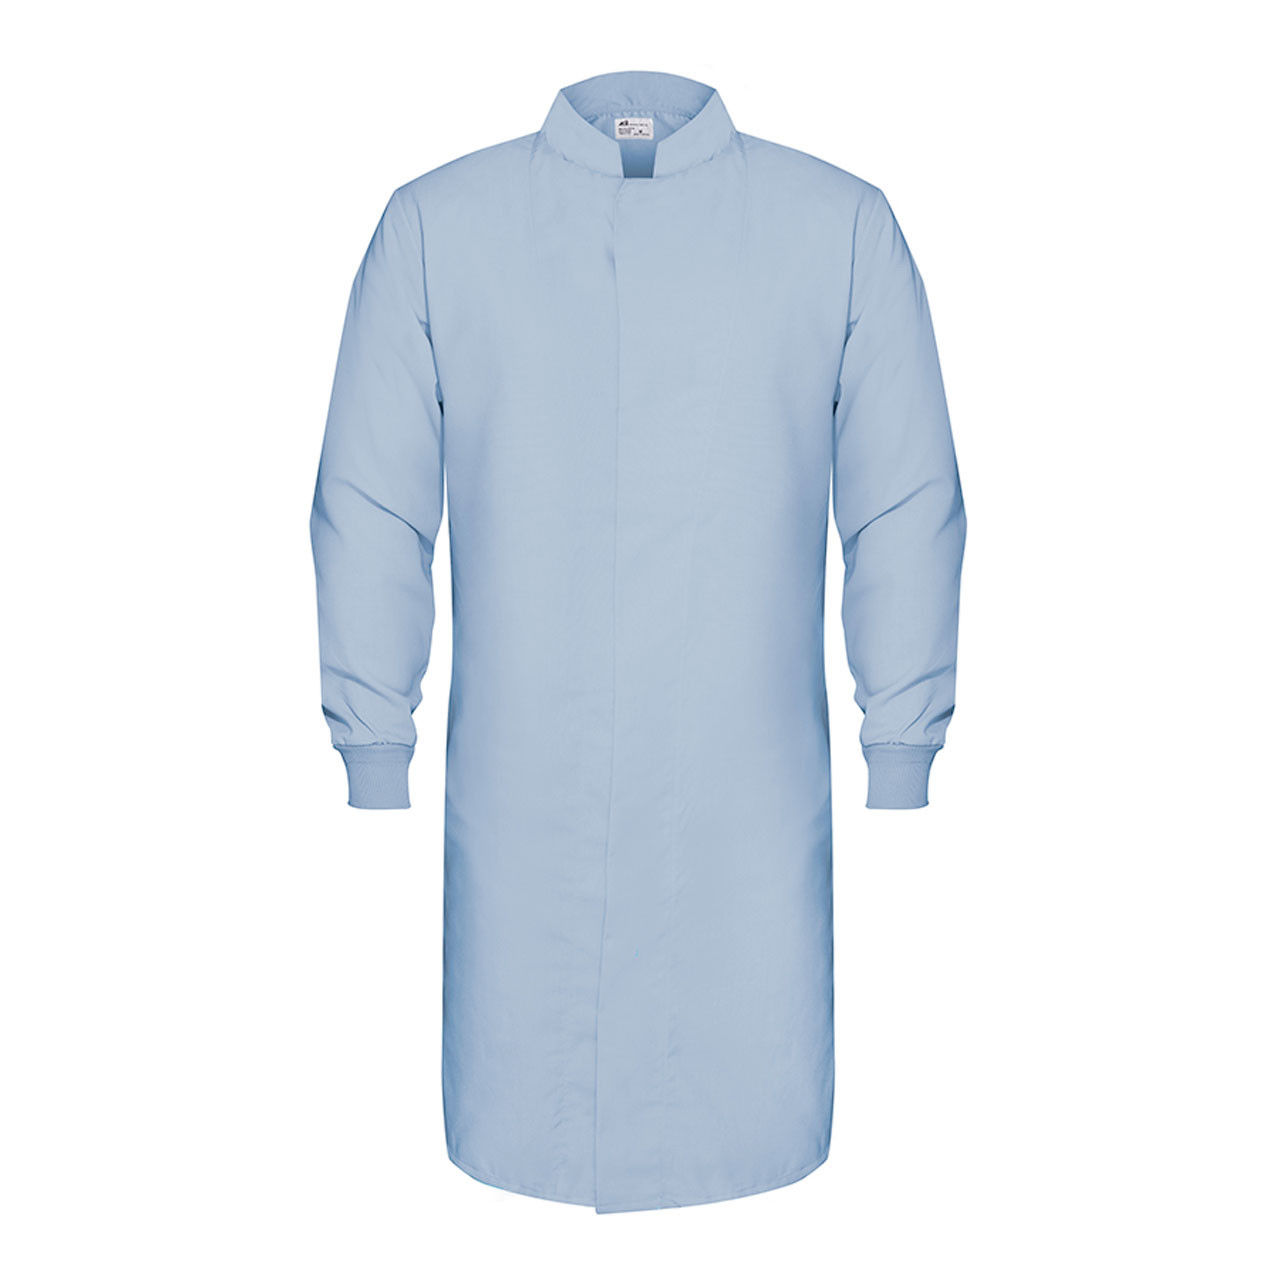 What industries are suitable for this lab coat?